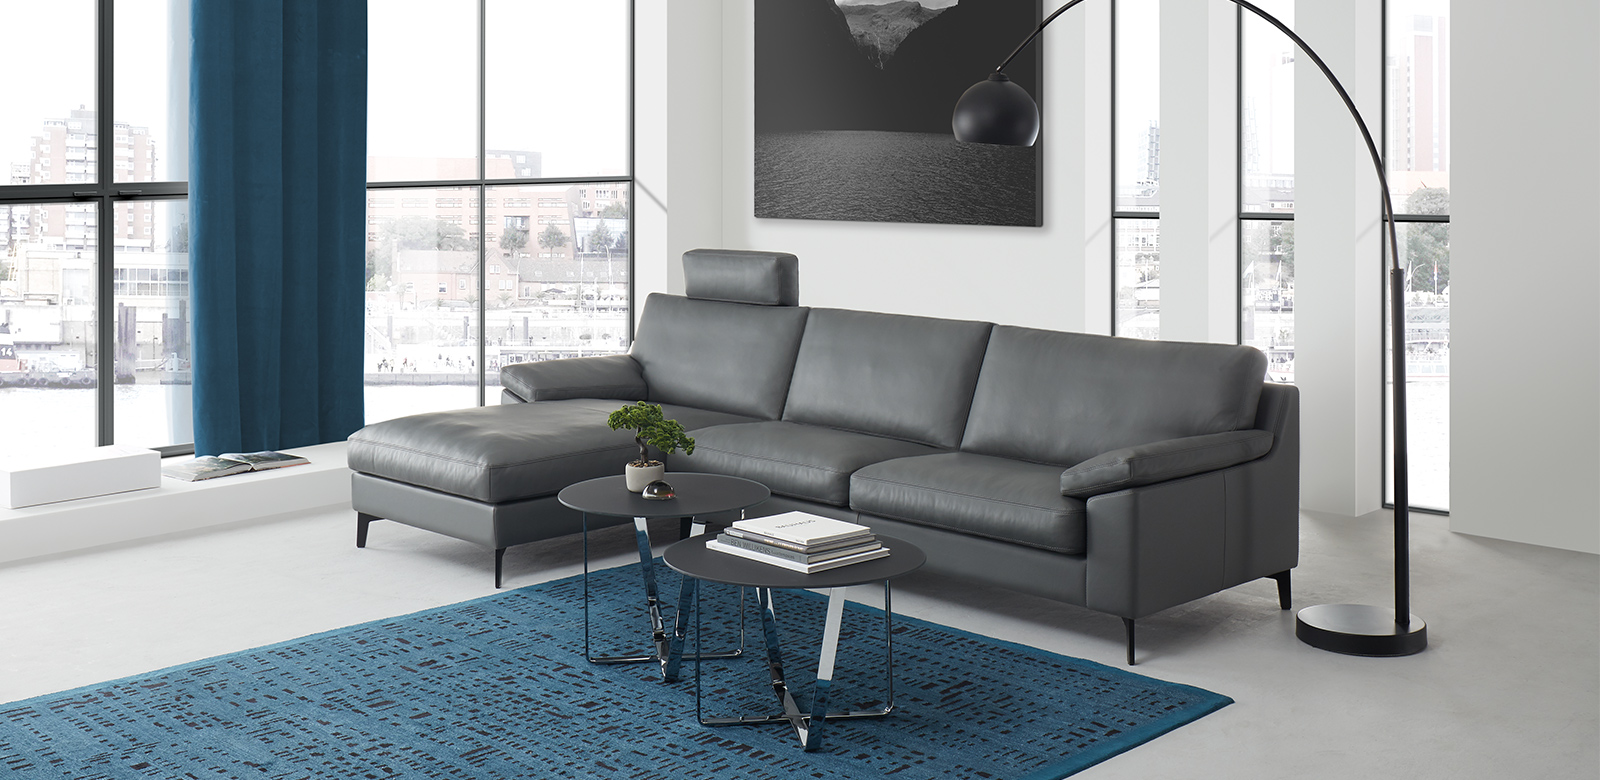 CL650 as longchair version with headrest, in black leather, in the loft-like living room